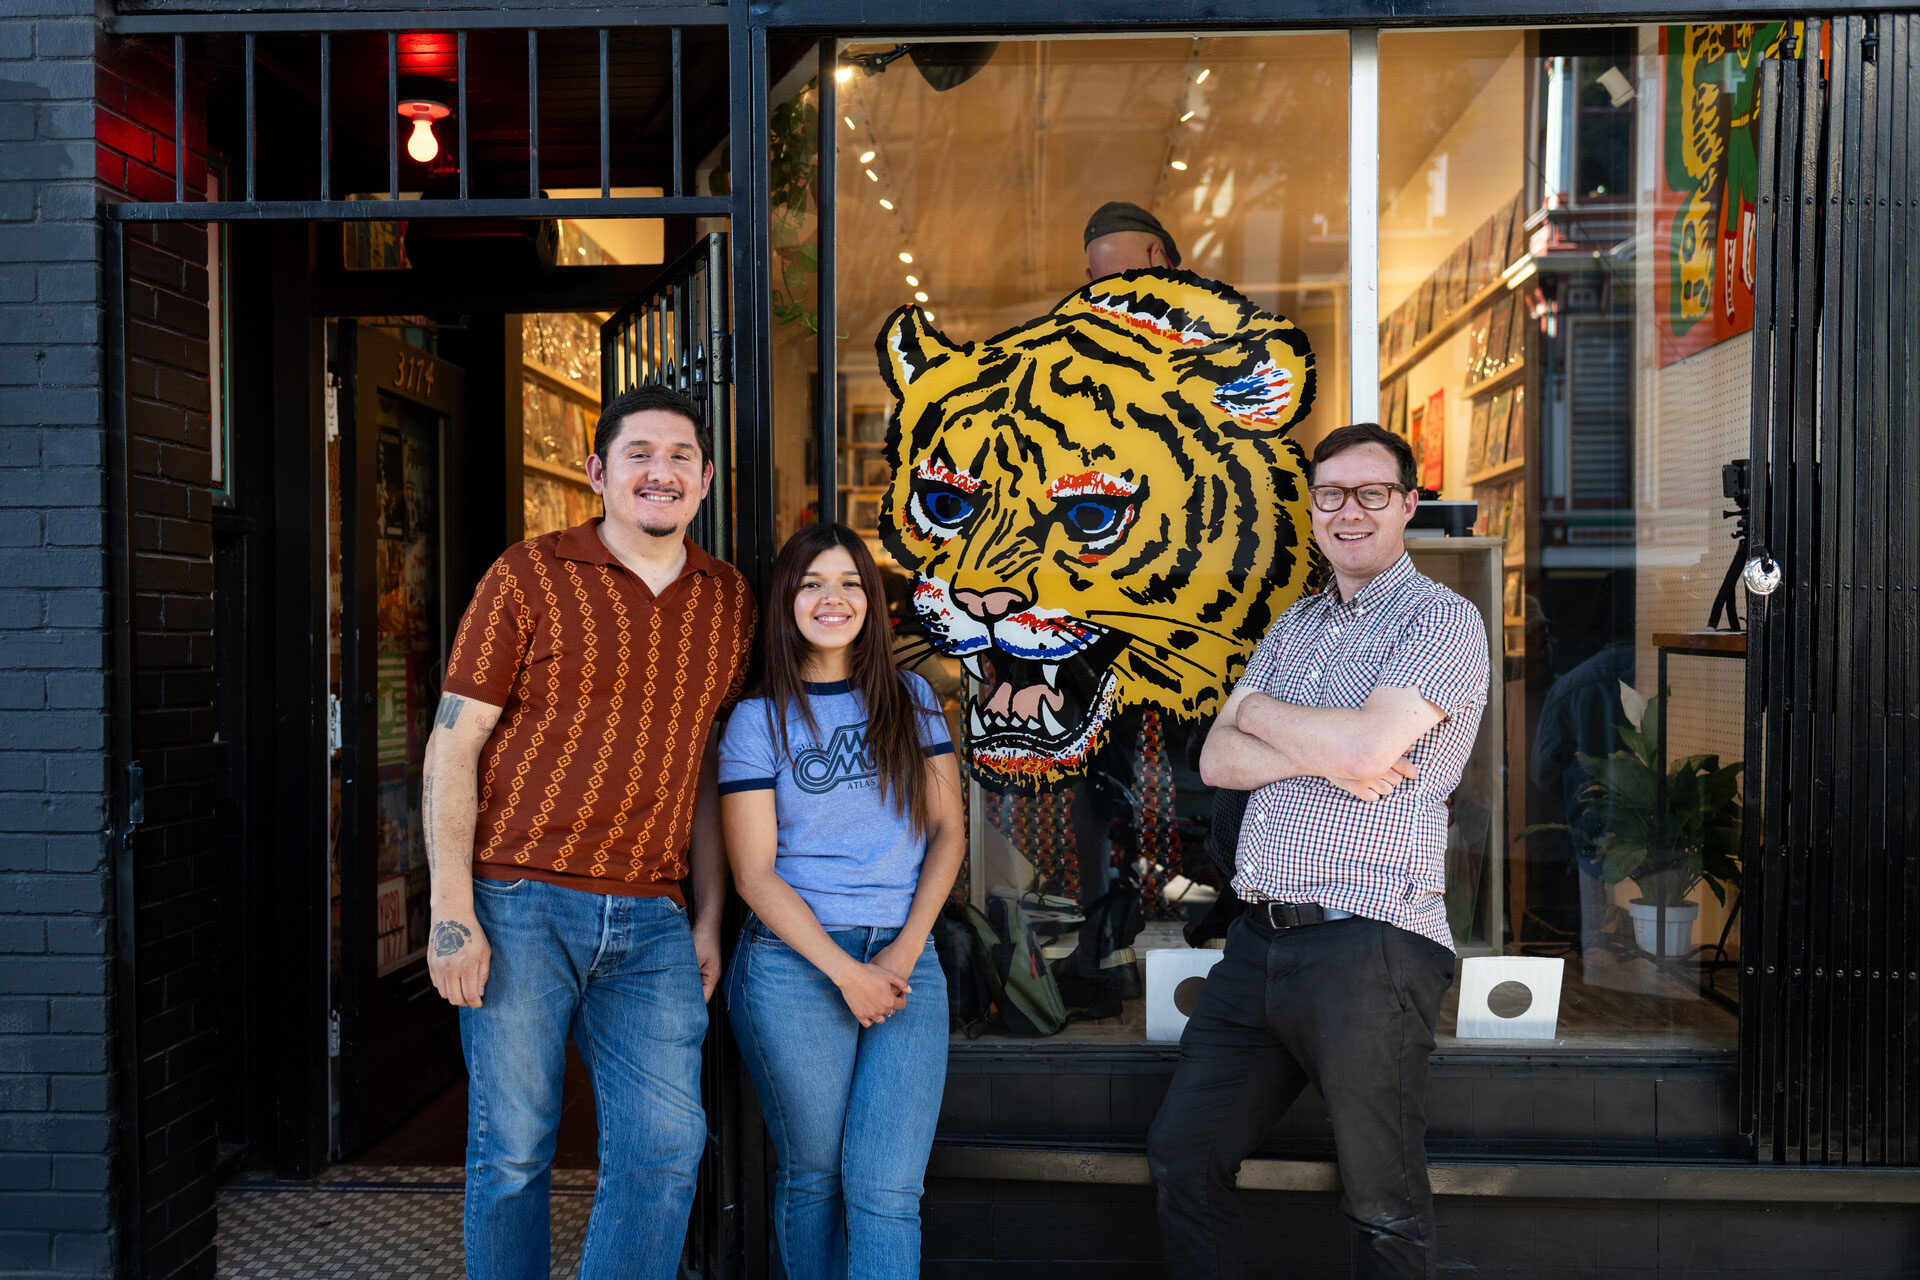 Three people in front of a window with a large tiger mural painted on it